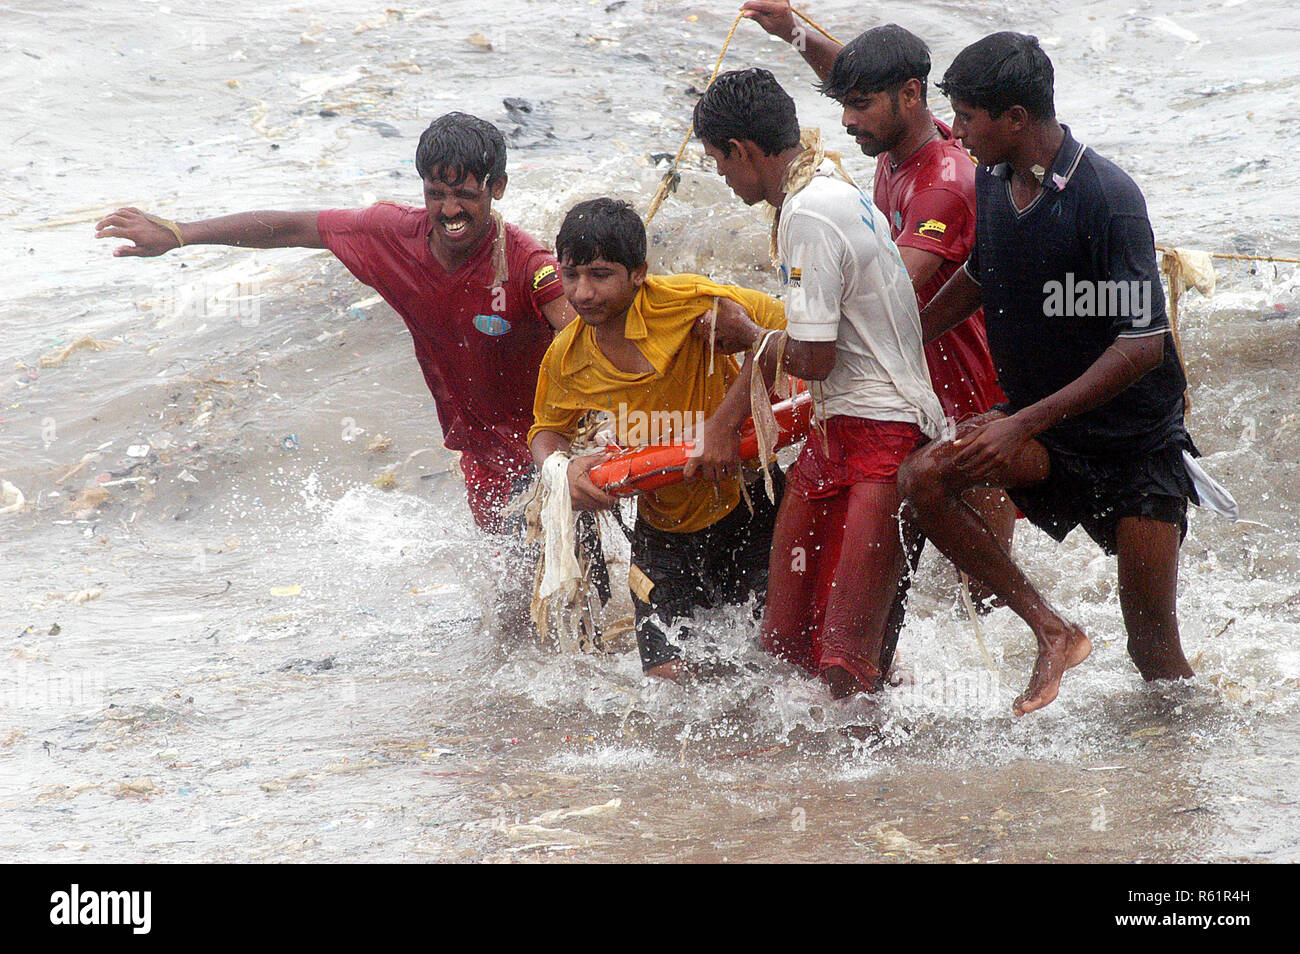 15 year old boy rescued at Marine Drive when he tried to retrieve one of his slippers by H2O Life Guards, Chowpatty, Mumbai, Maharashtra, India. Stock Photo